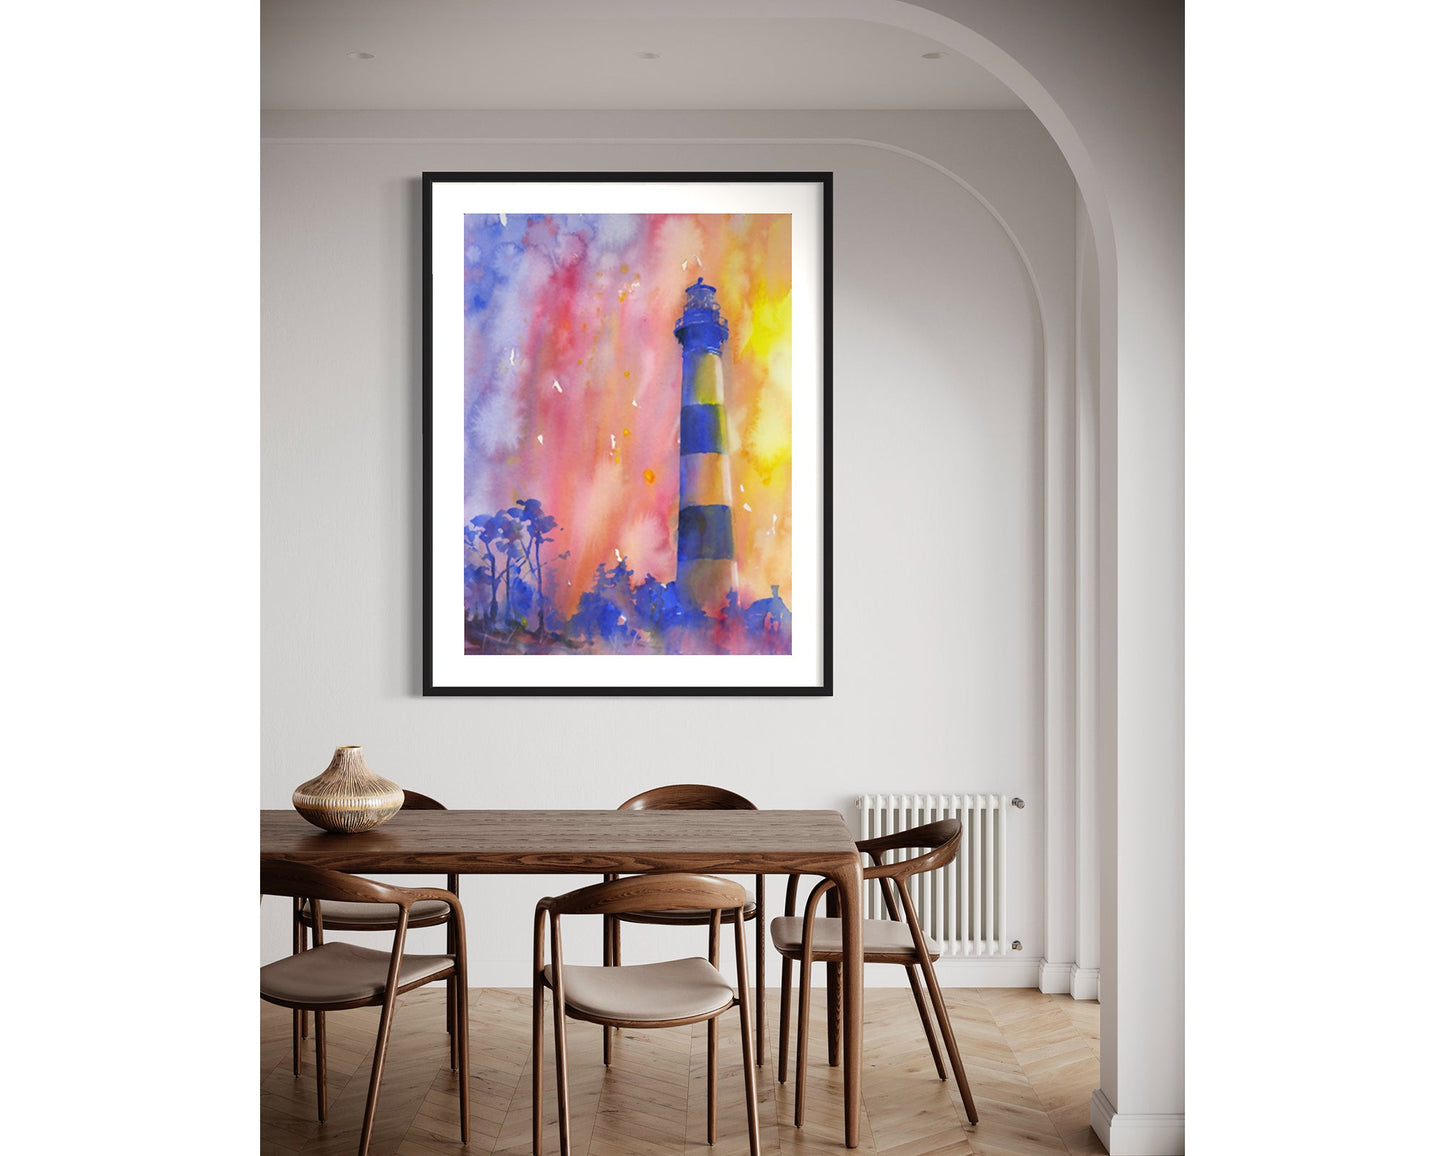 Bodie Island lighthouse at sunset in Outer Banks (OBX) of North Carolina- USA, Lighhtouse watercolor landscape fine art Bodie Island (original)